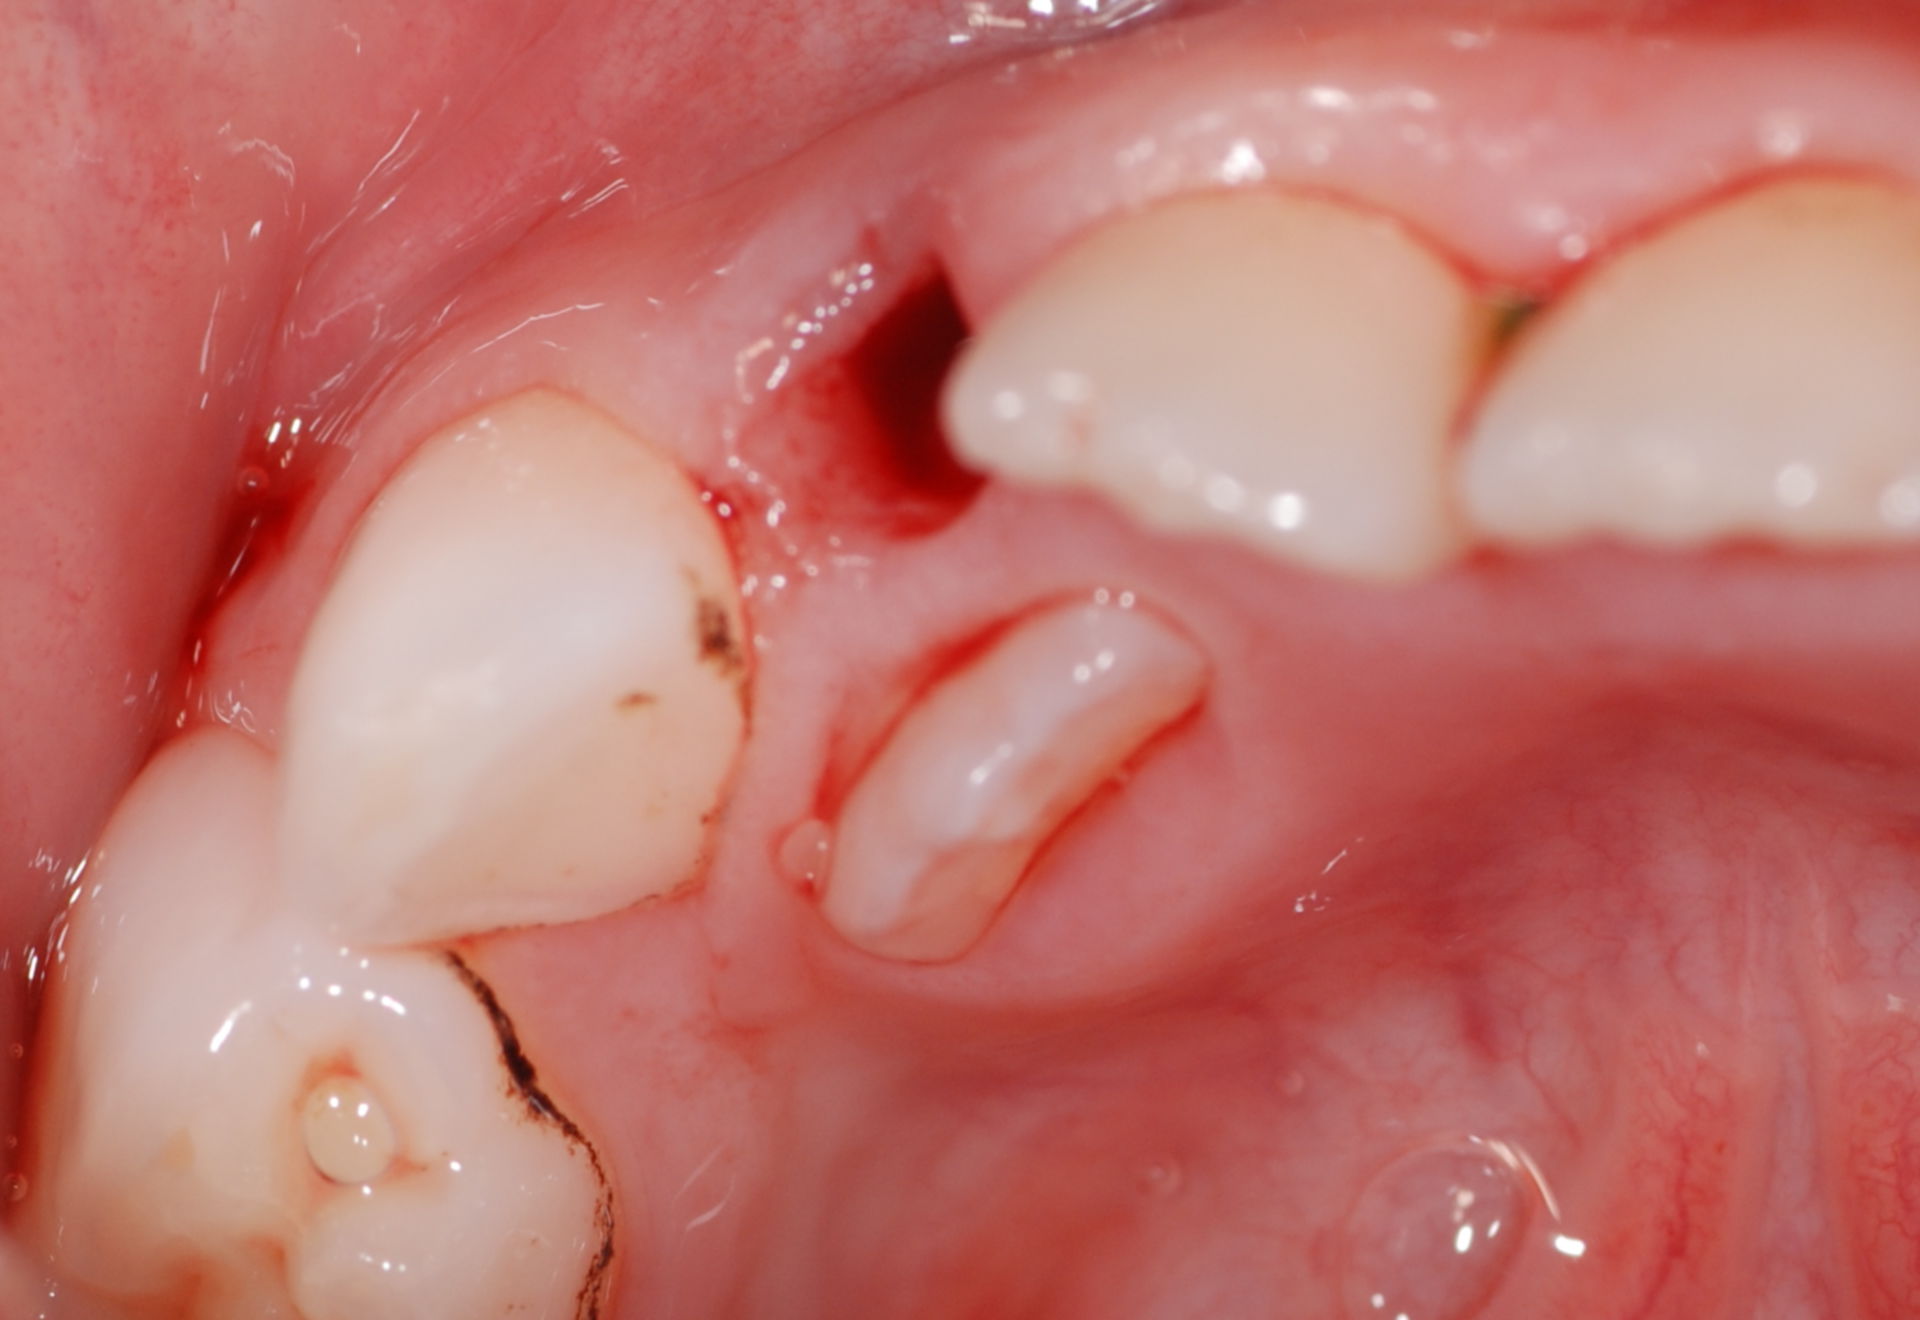 After the extraction of the deciduous tooth